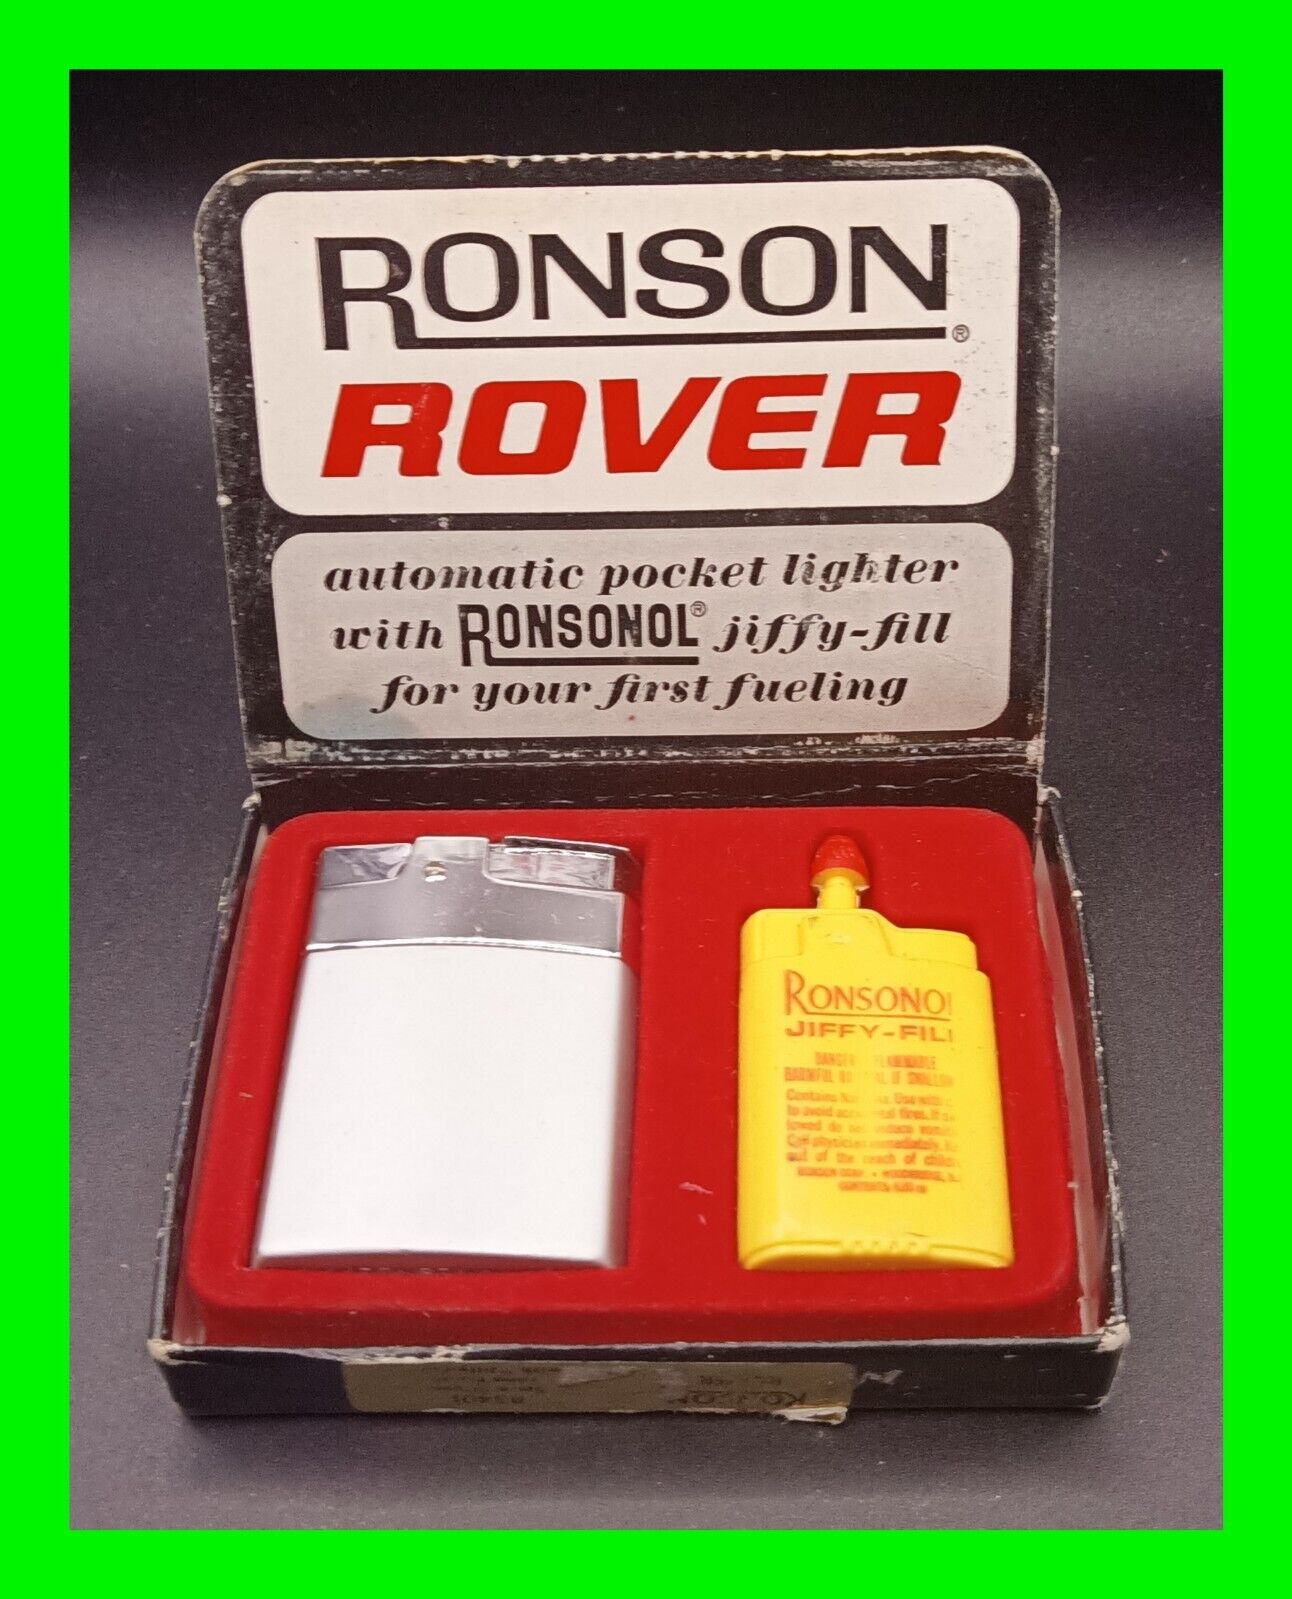 Vintage 1960’s Ronson Rover Petrol Lighter With Sealed Fuel Can, Brush & Box NOS